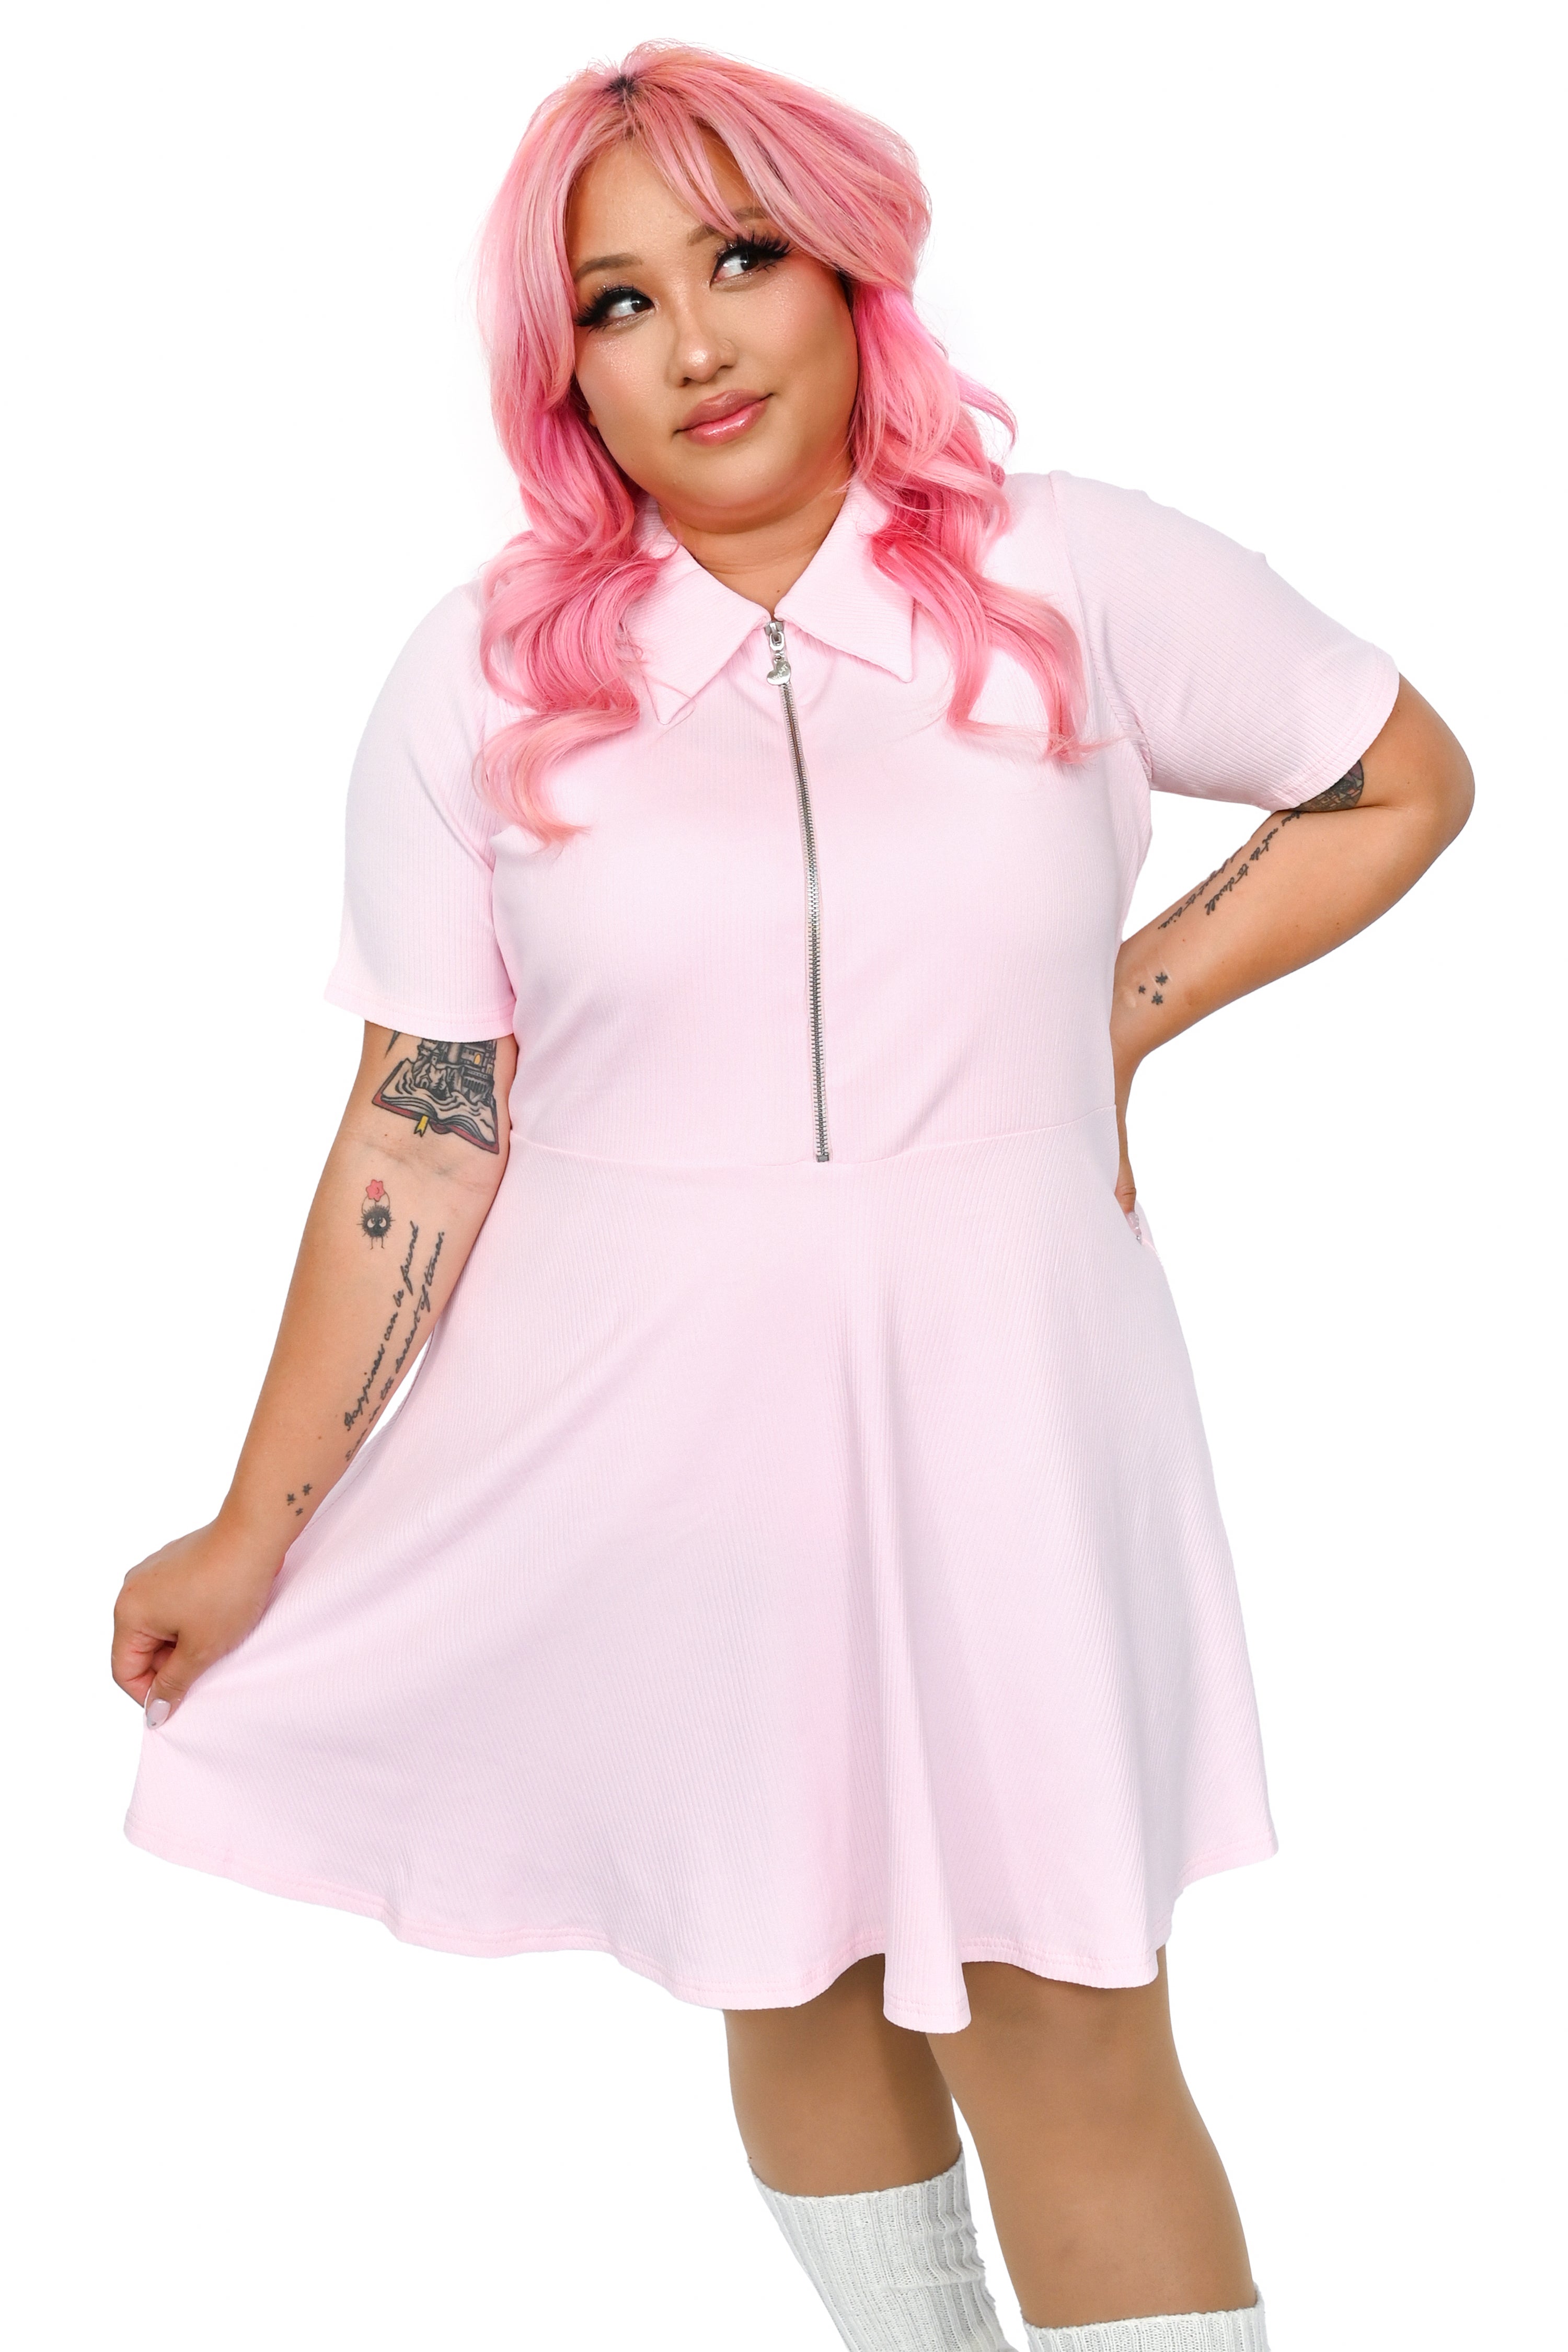 perfect pink skater dress Made out of a soft stretch rib. Pointed collar. Front zip closure